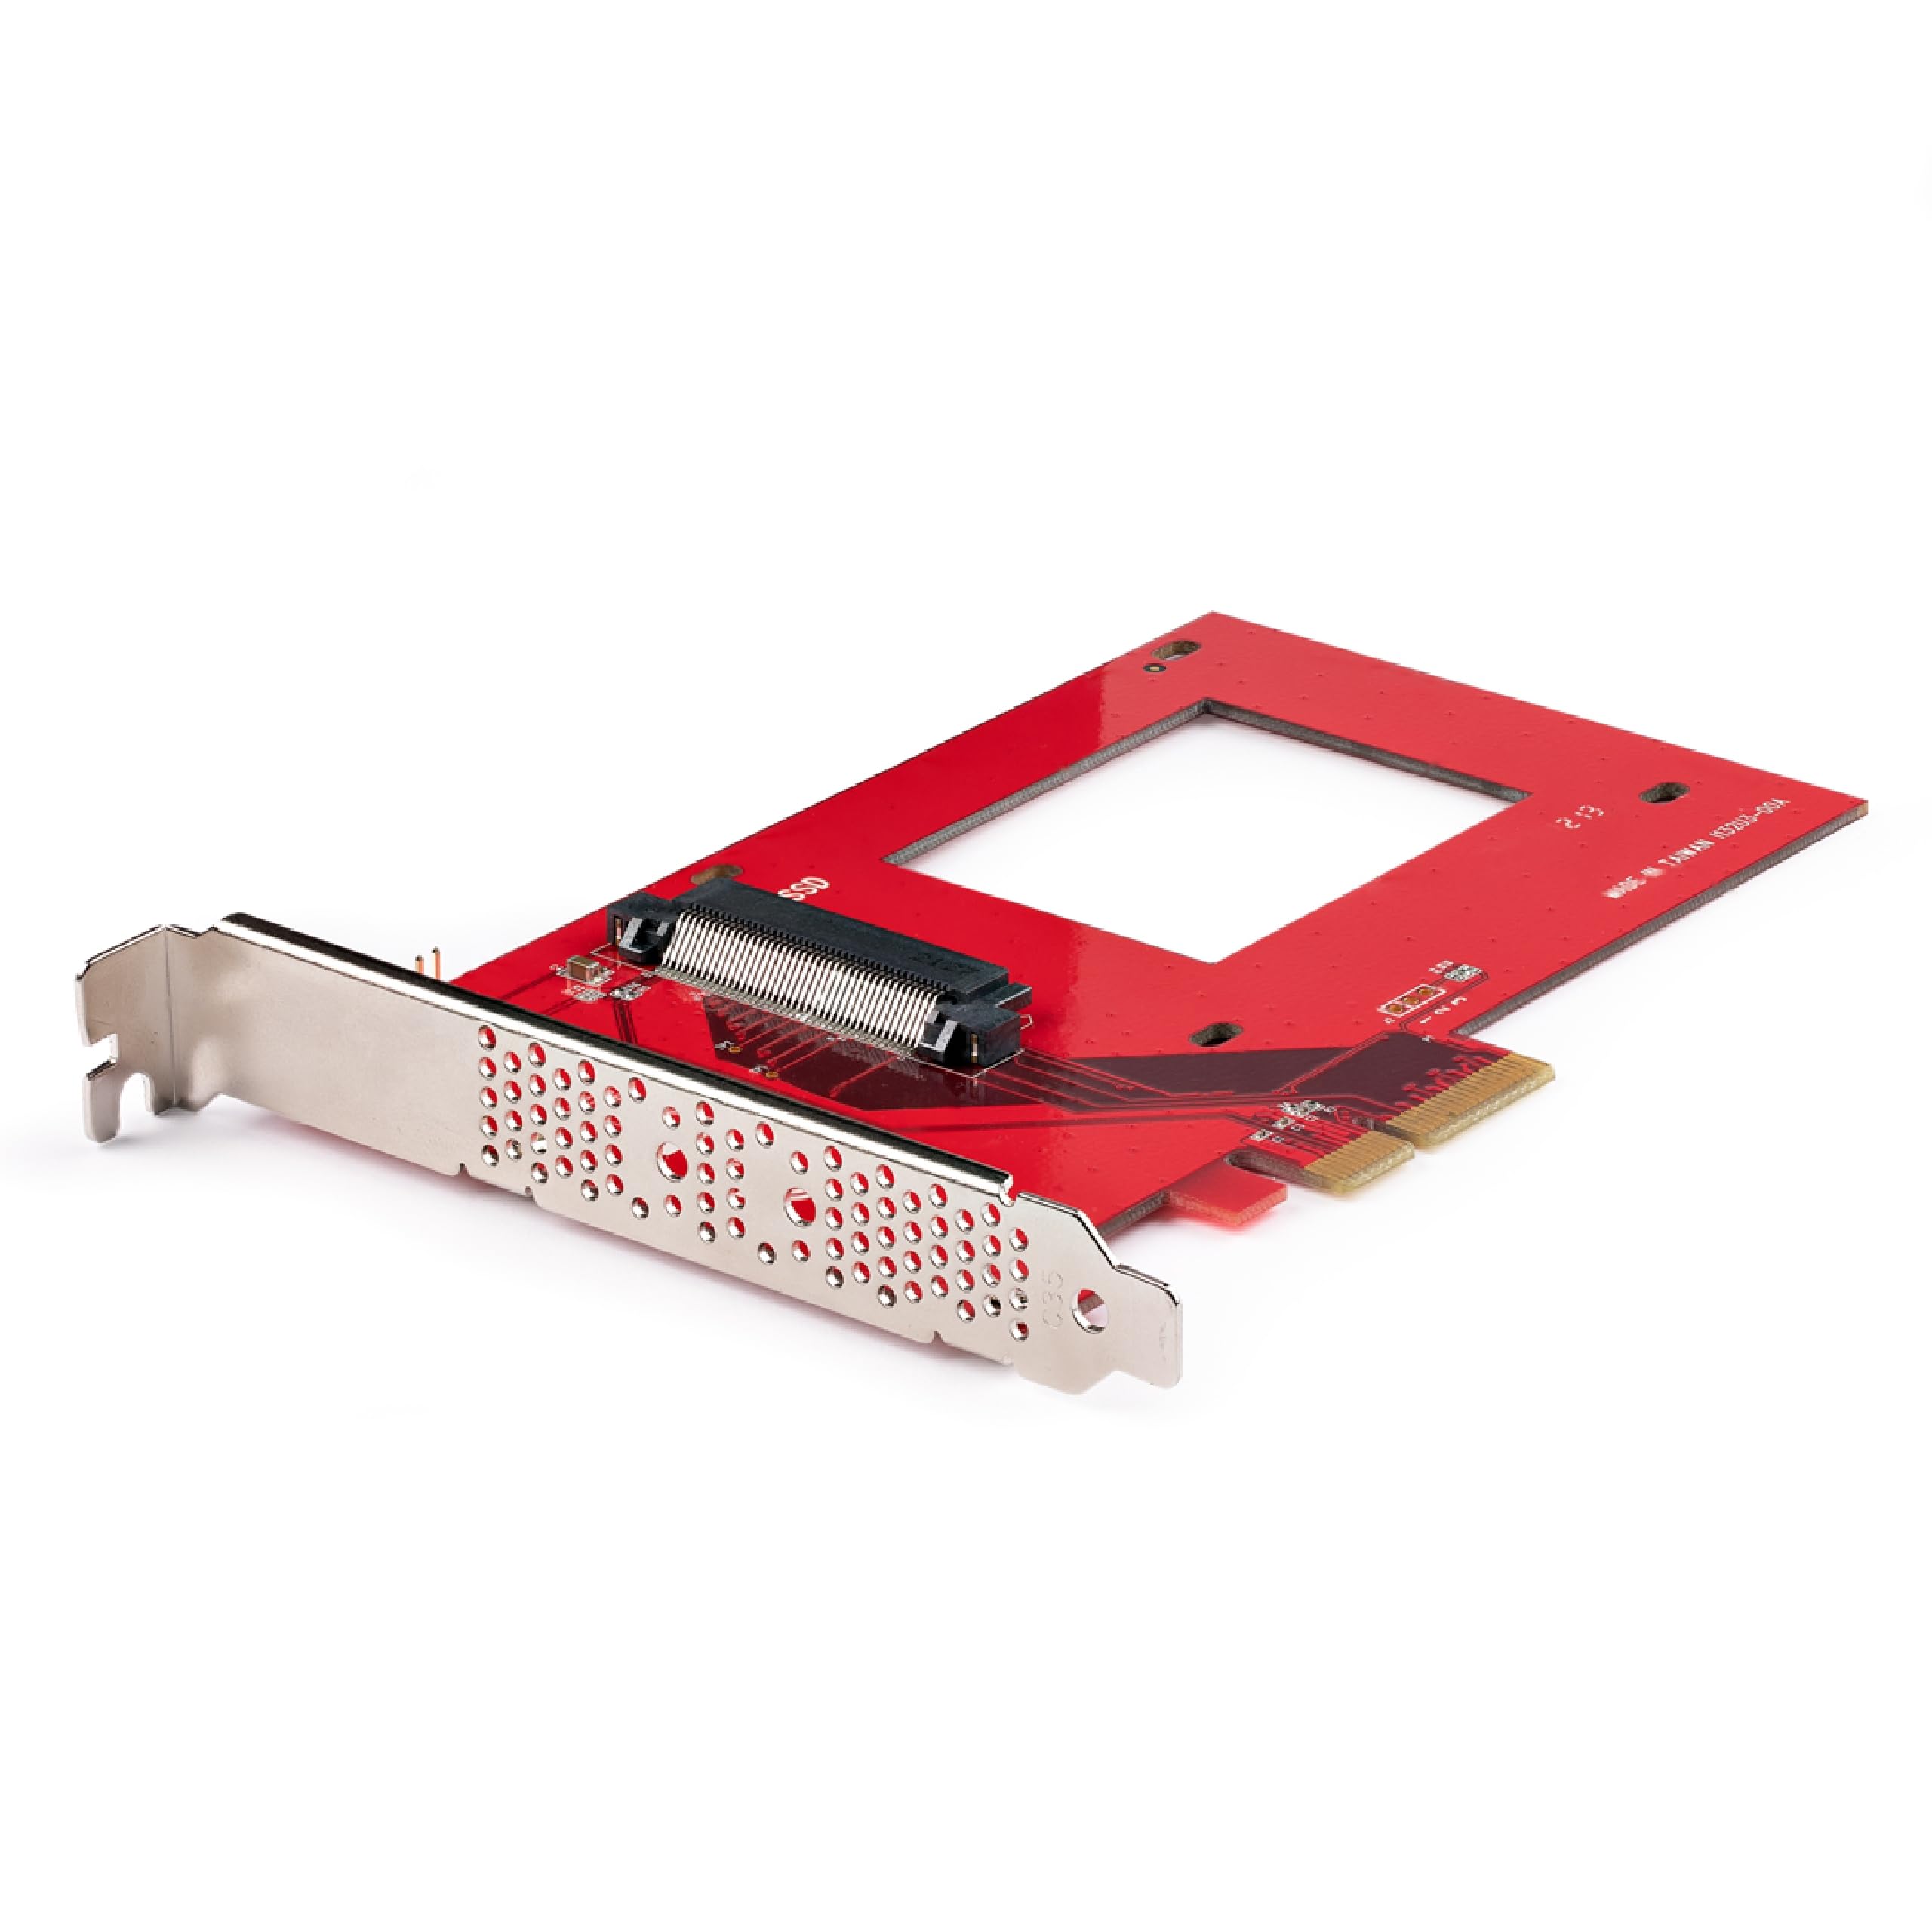 StarTech.com U.3 to PCIe Adapter Card - PCIe 4.0 x4 Adapter for 2.5